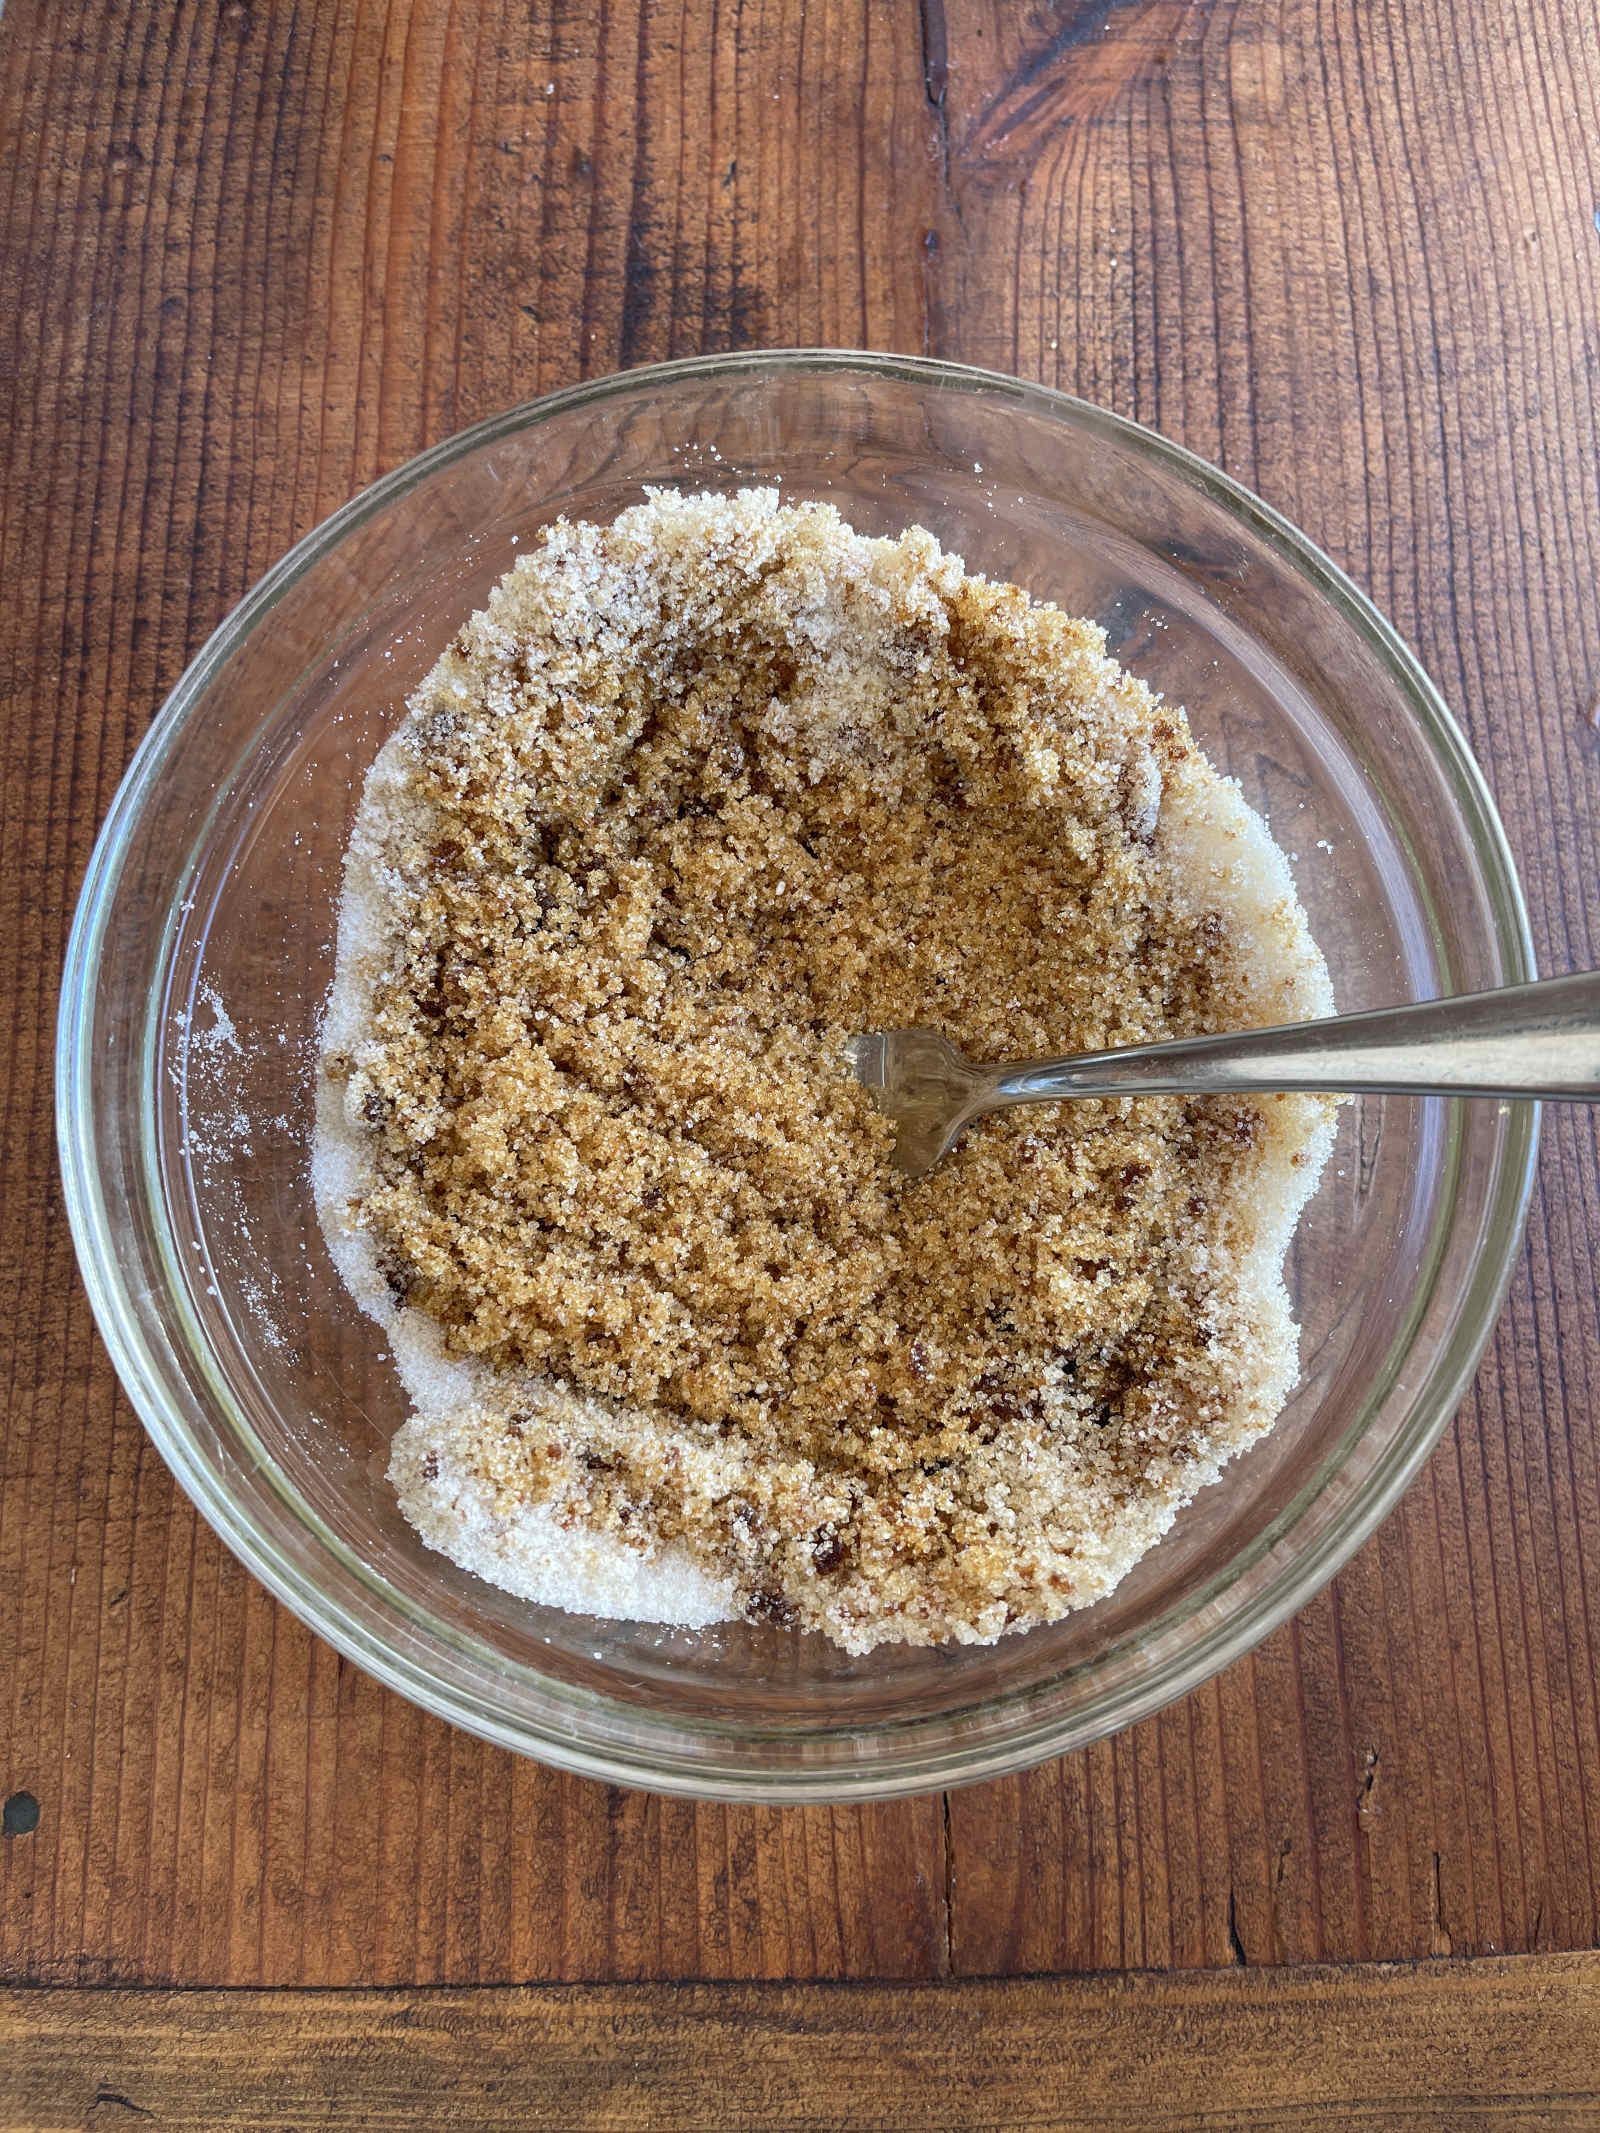 Partially mixed granulated sugar and molasses on their way to becoming brown sugar. The mixture sits in a glass bowl on a dark wooden tabletop.